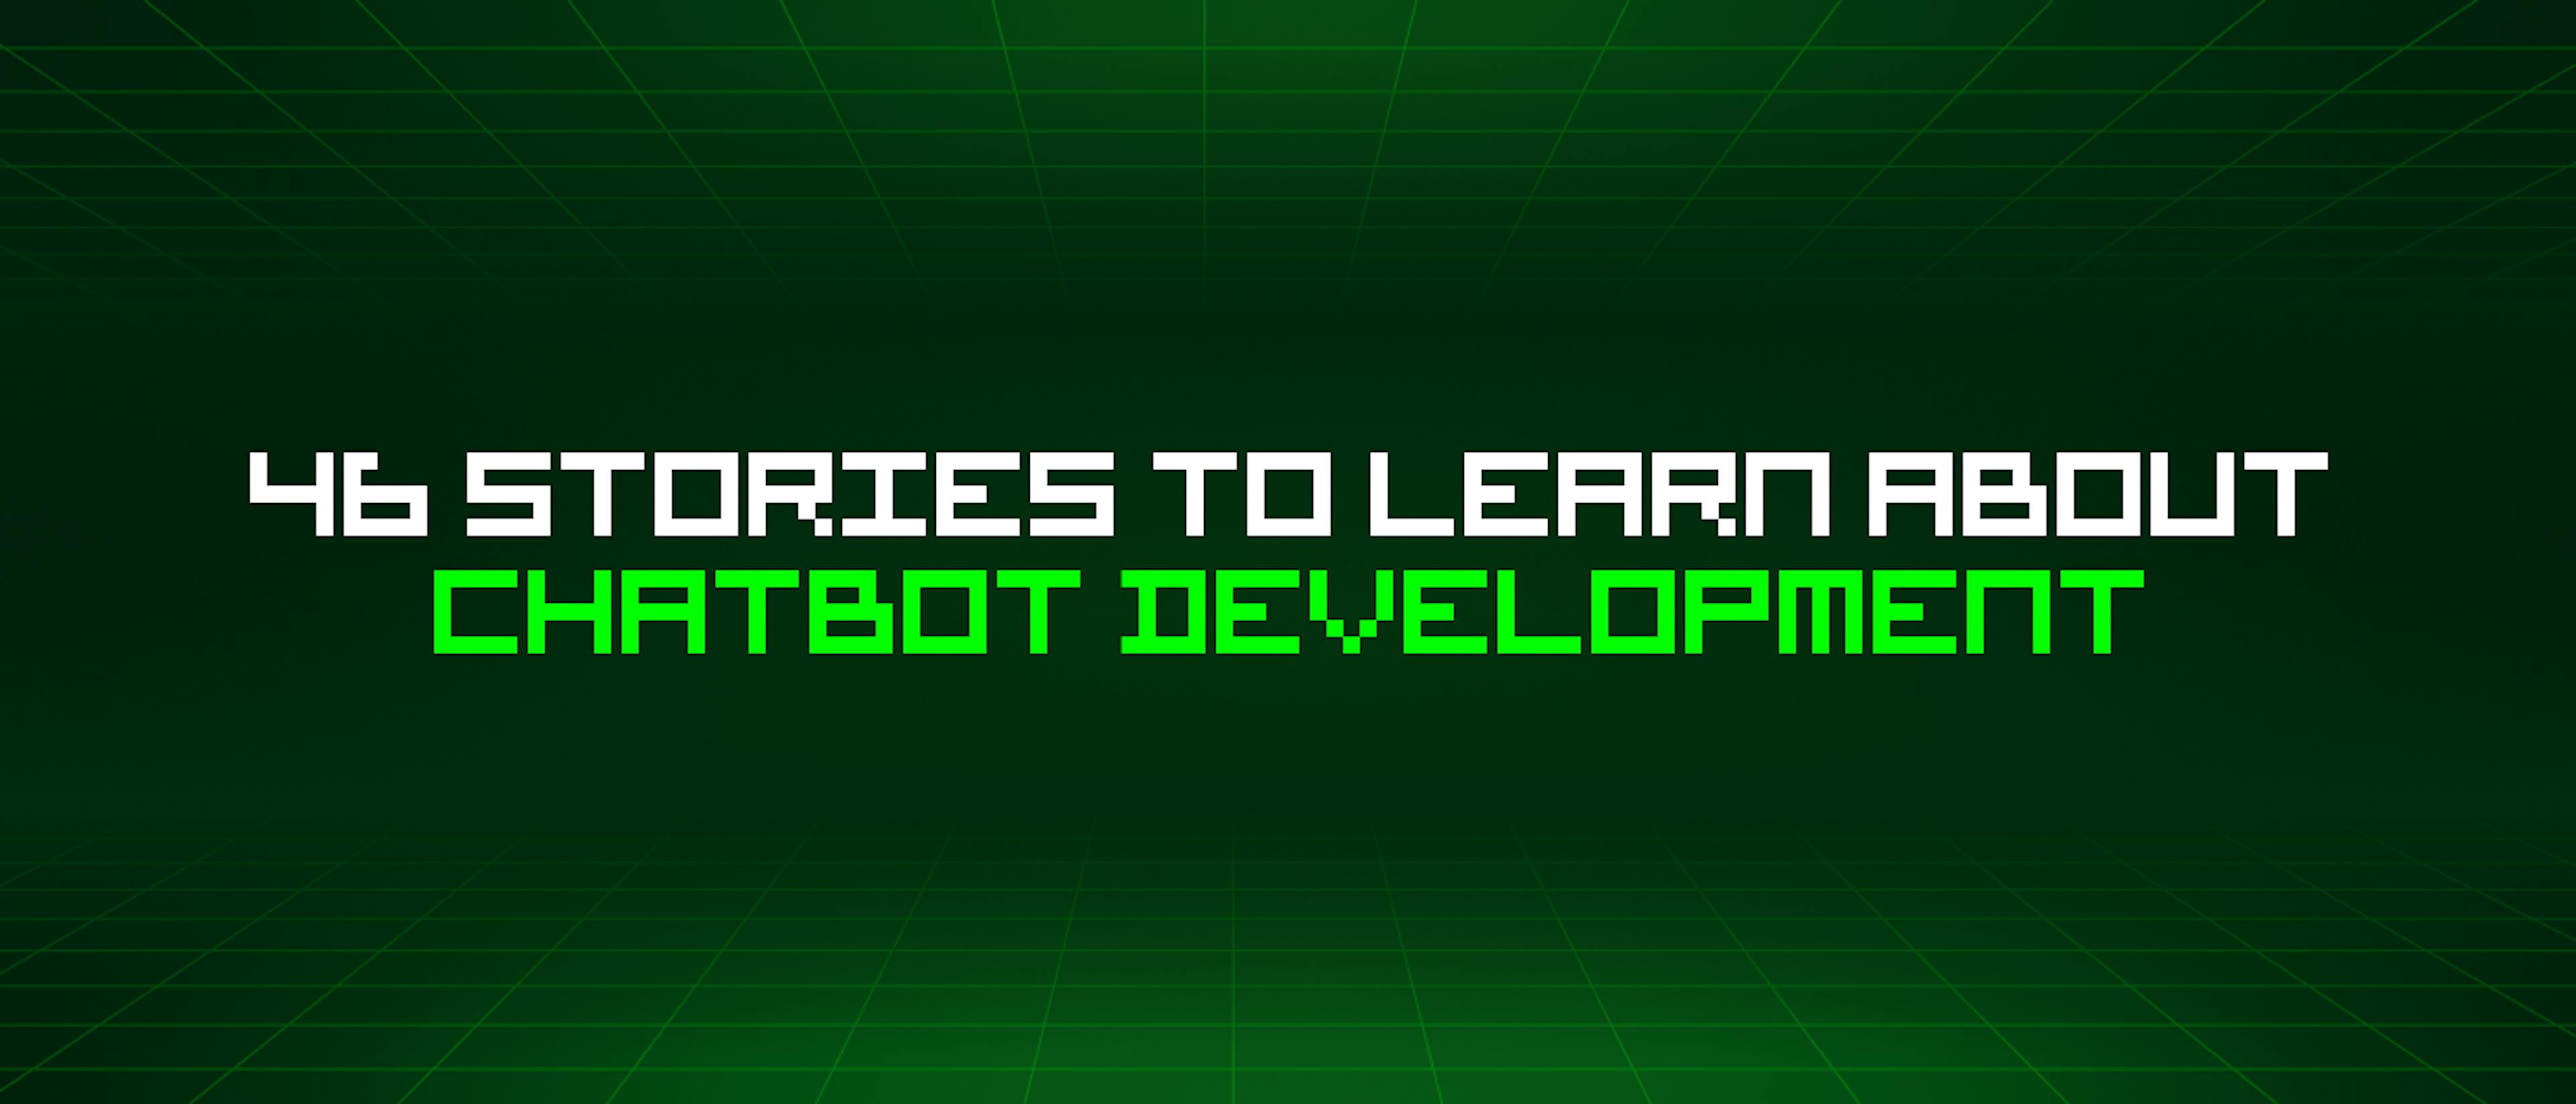 featured image - 46 Stories To Learn About Chatbot Development